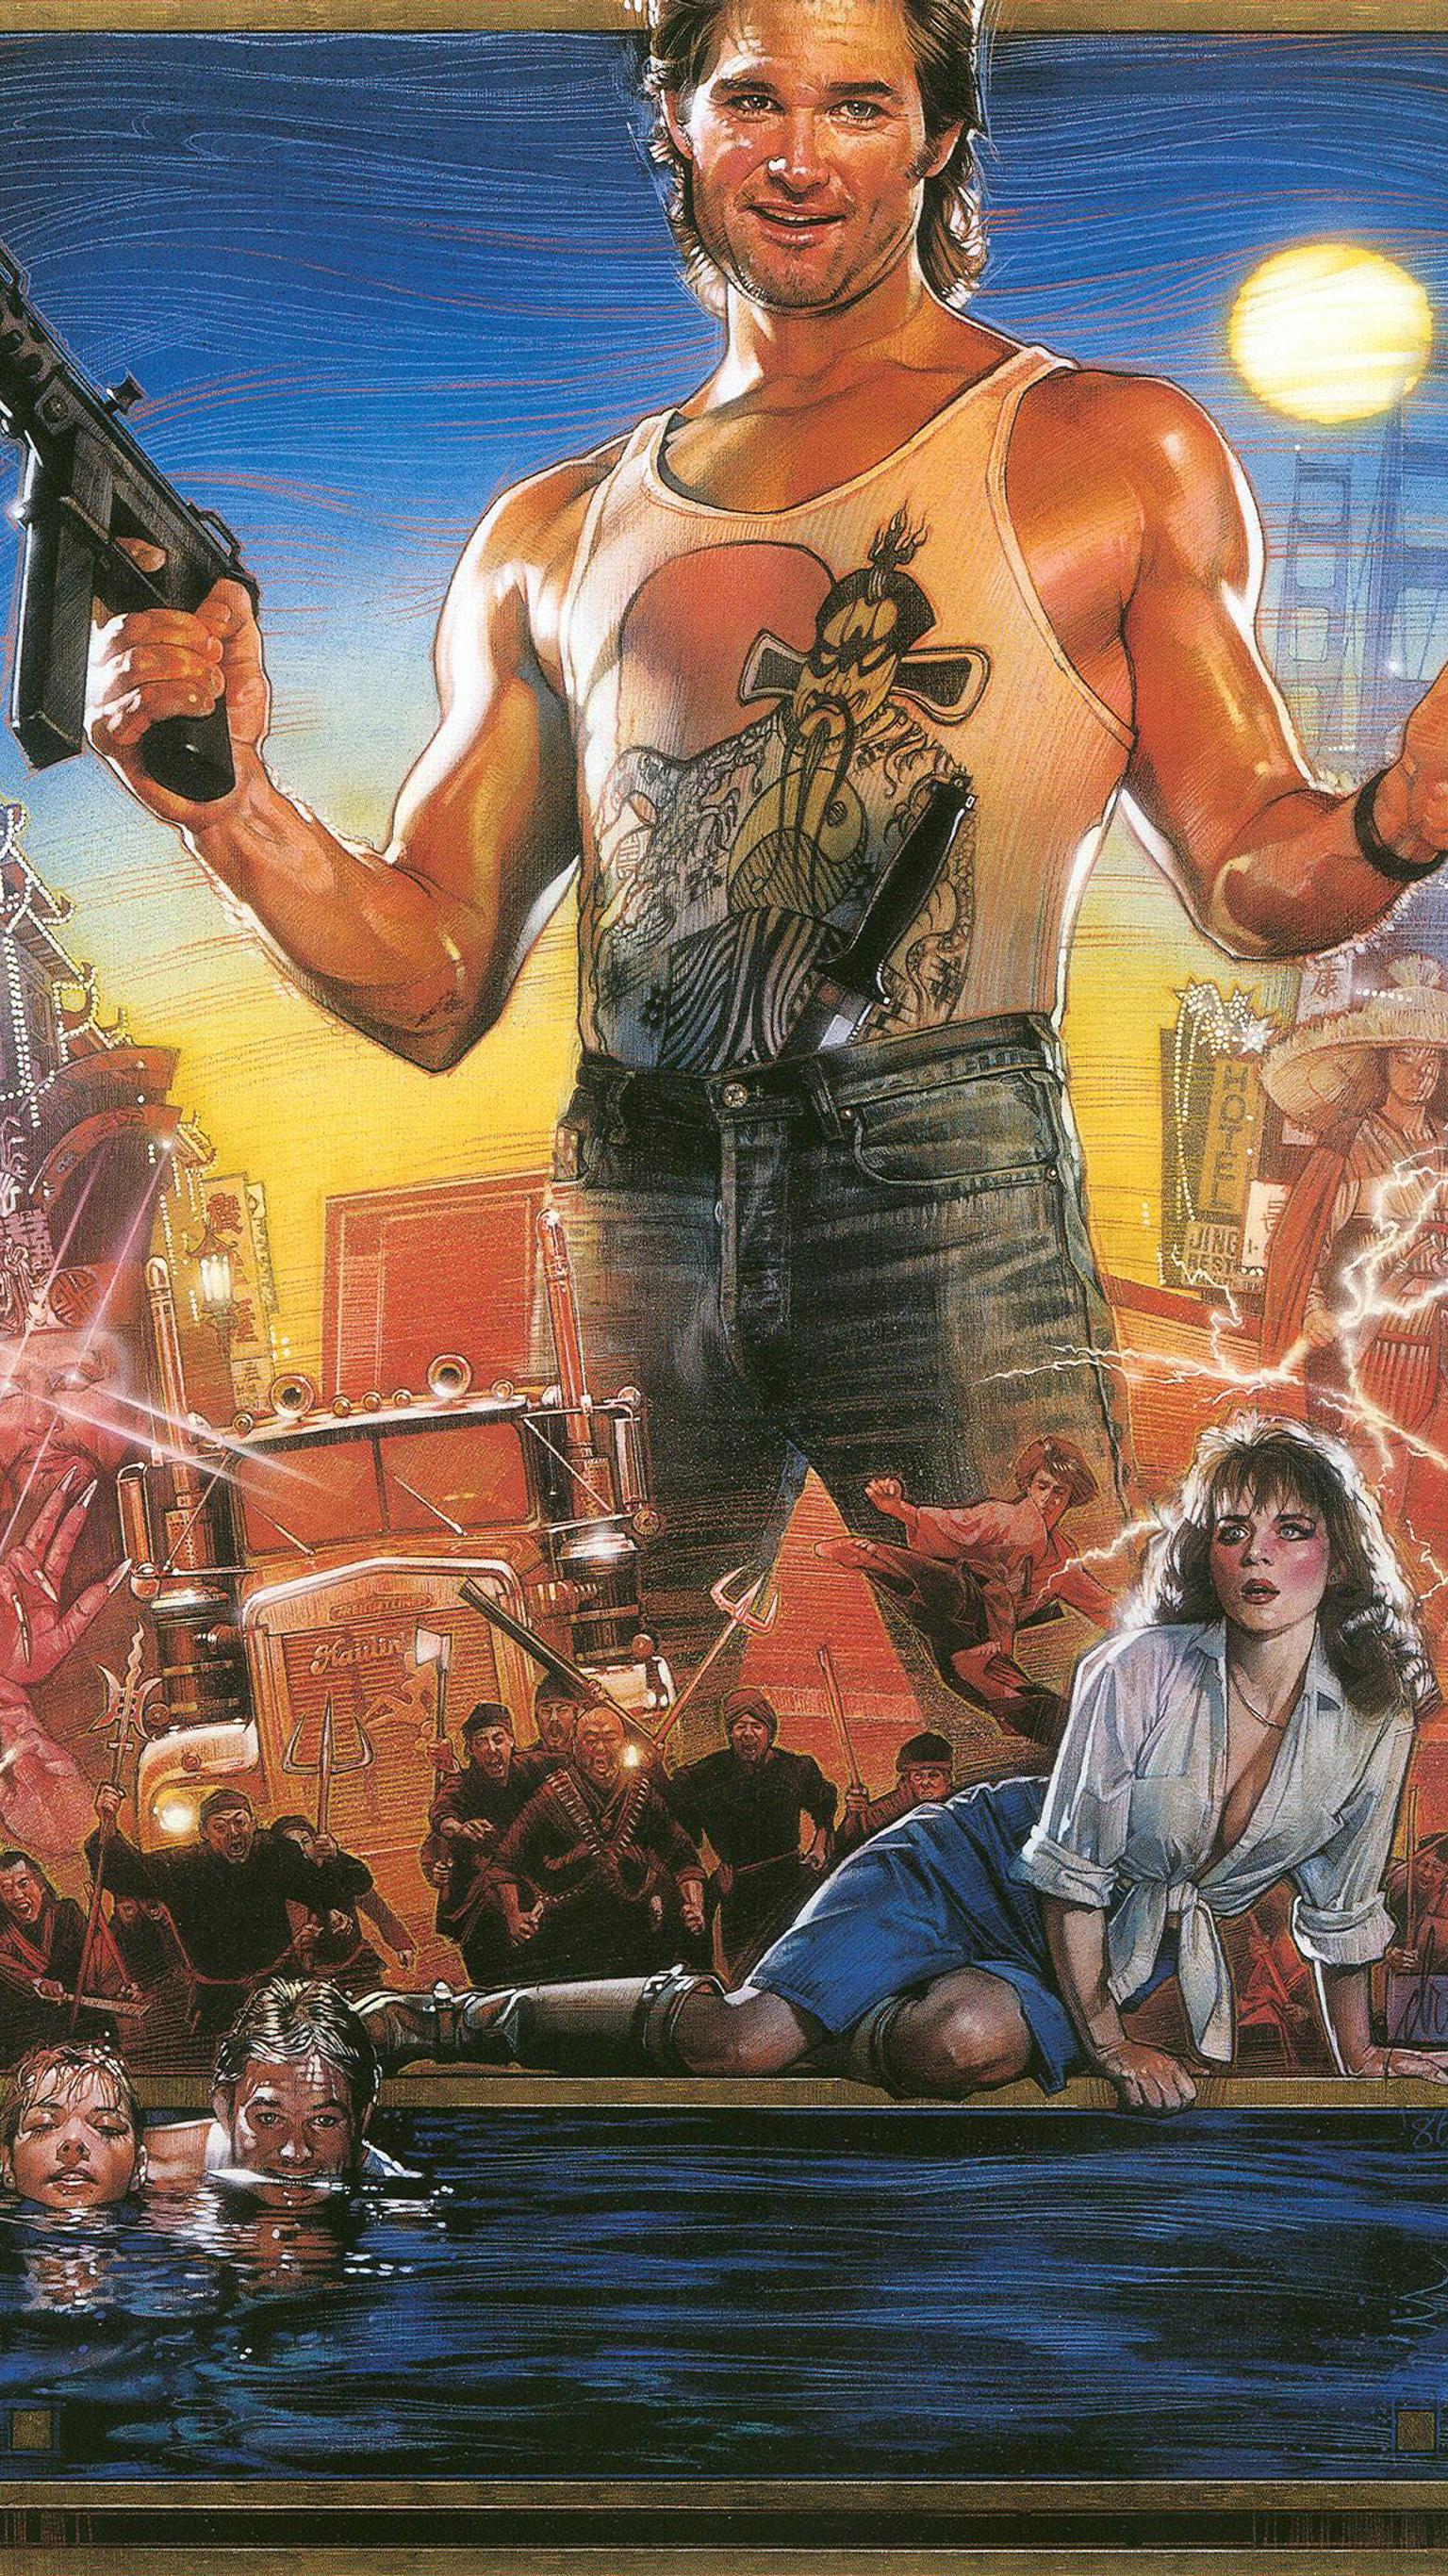 Big Trouble In Little China Wallpaper .wallpaperaccess.com